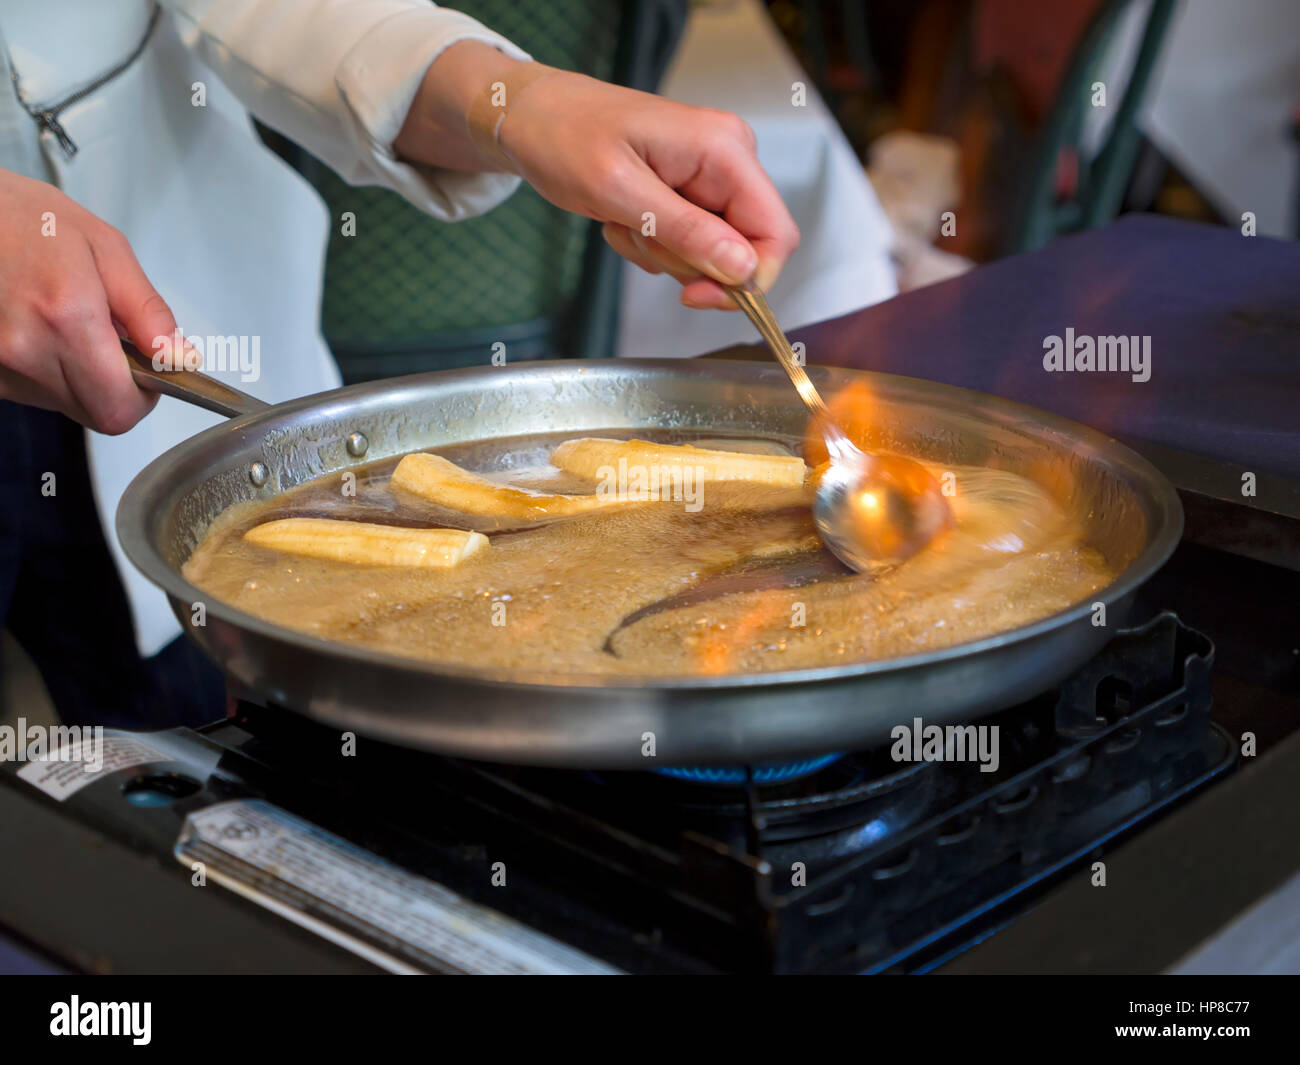 Bananas Foster being prepared at the table in a restaurant Stock Photo